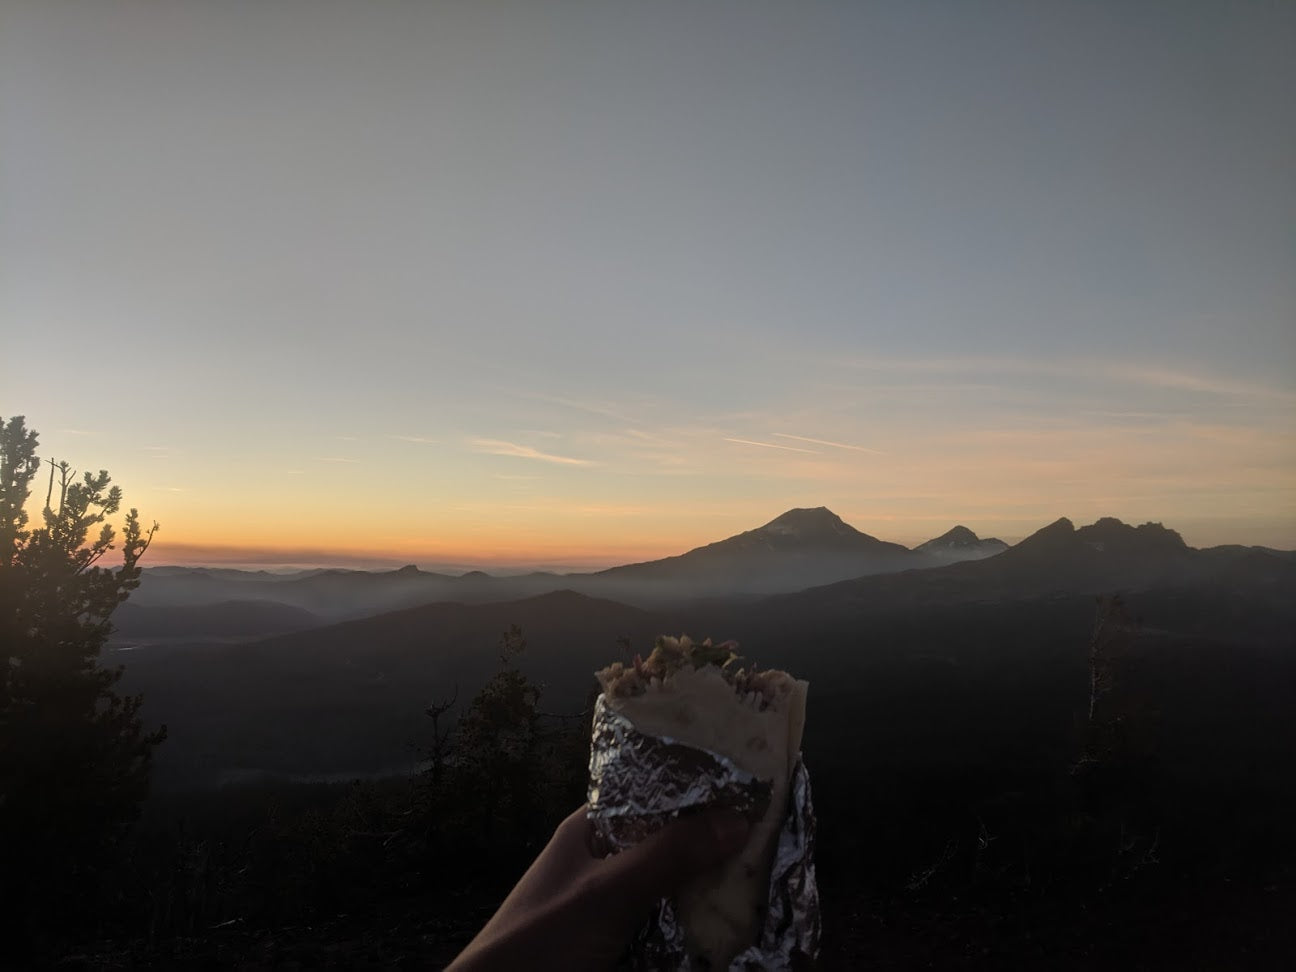 Burrito with a view.